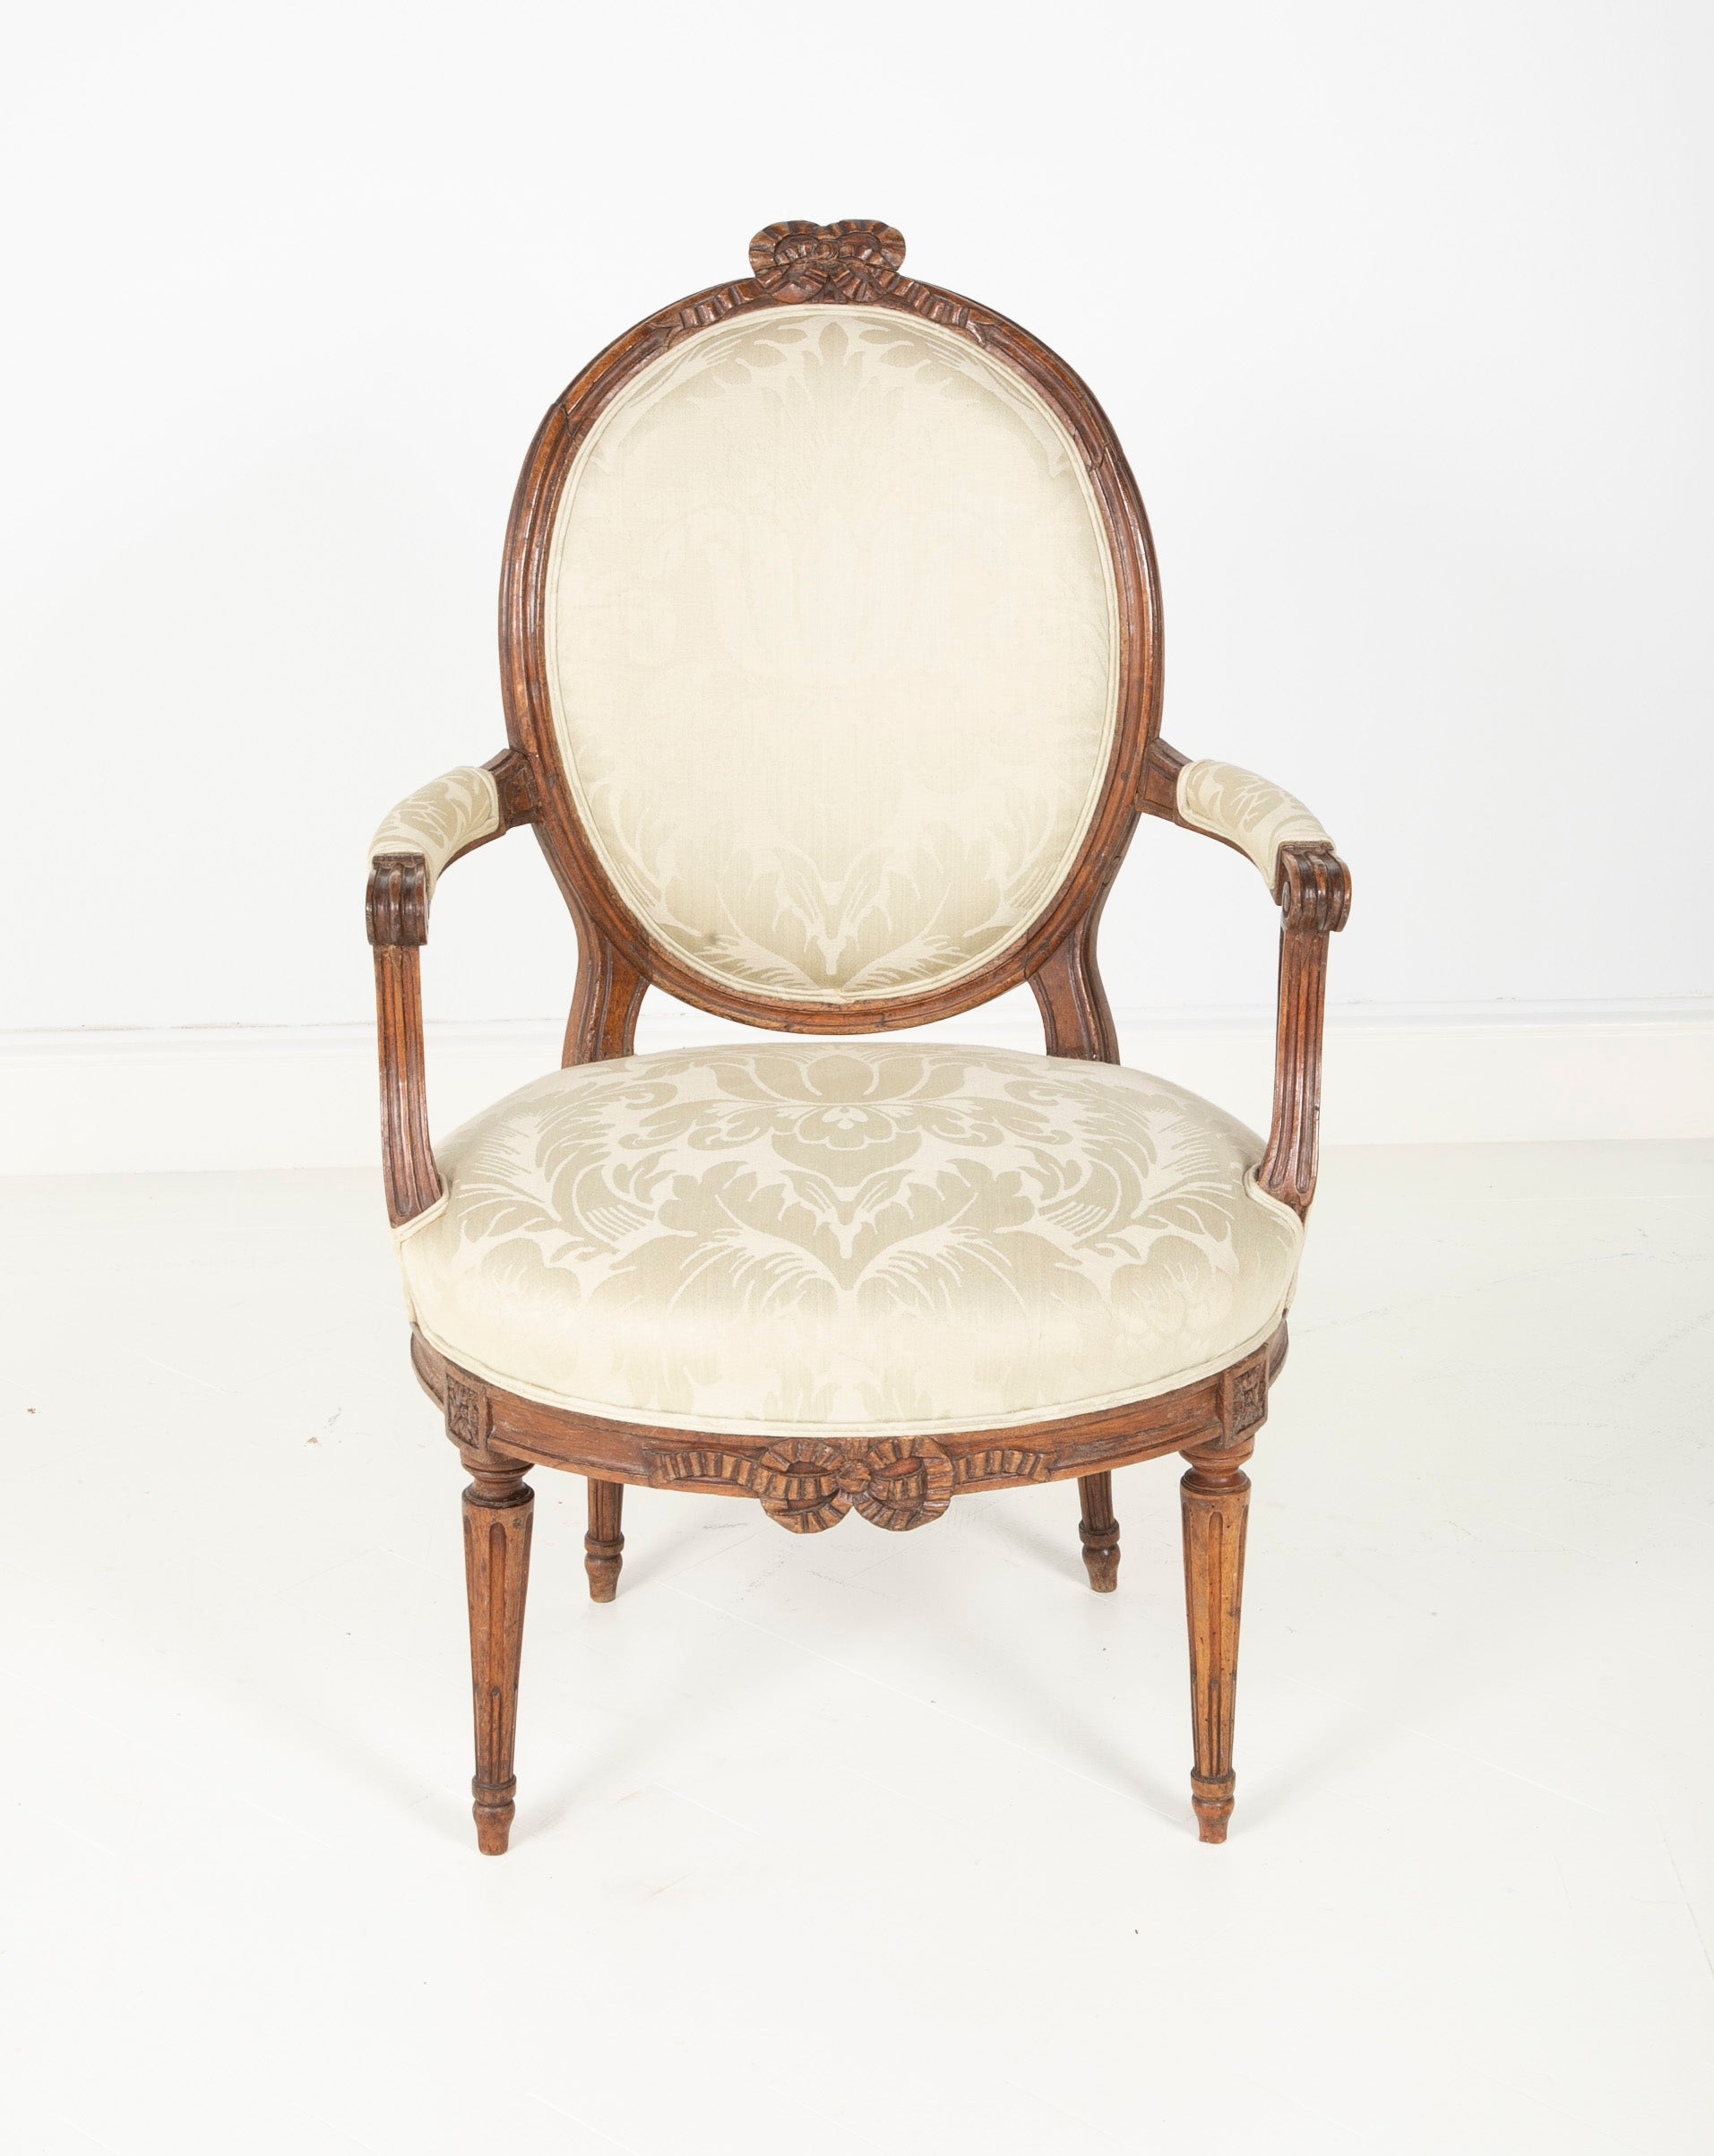 Pair of Louis XVI  Period Oval Back Fauteuil